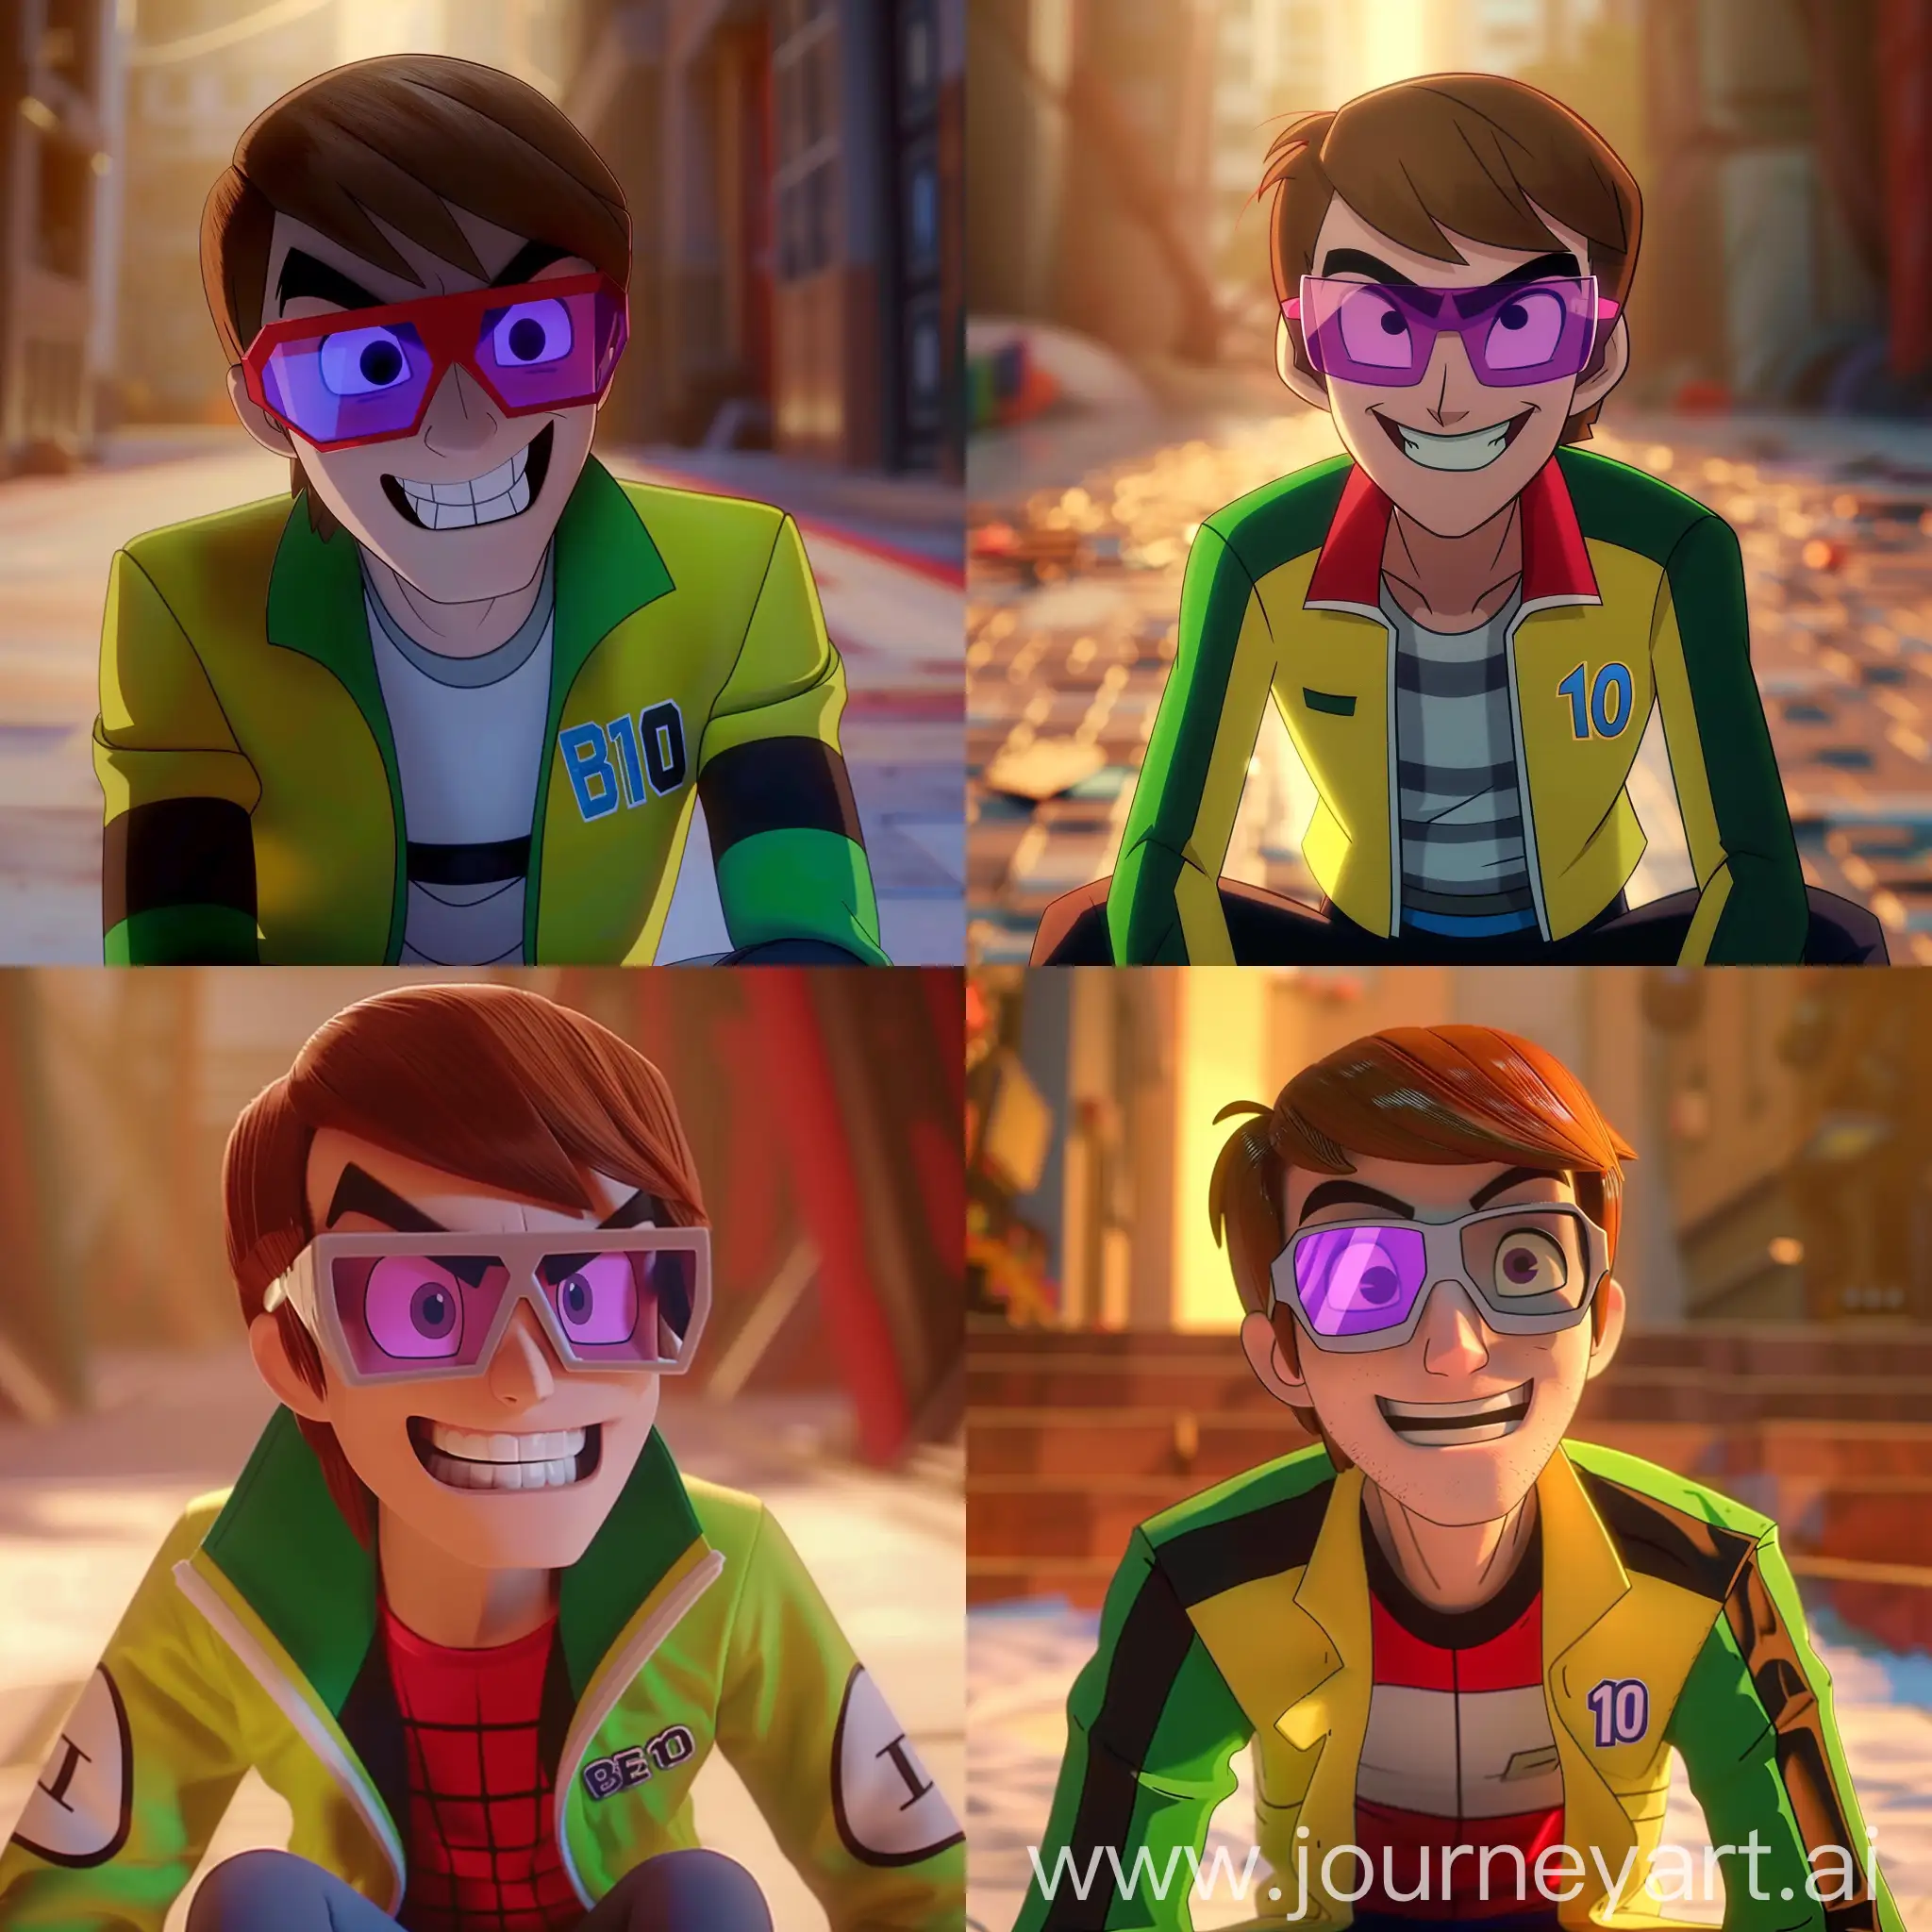  animated character in the style of Man of Action, wearing glasses with one lens of color purple and other lens of color grey, straight angle close shot with him smirking and "ben 10" is embroidered on his yellow jacket, he's sitting on the empty hollow space with blur aesthetic background  --cref https://cdn.discordapp.com/attachments/1215979386310889605/1216982884083040266/Picsart_24-03-08_22-57-05-471.jpg?ex=66025ea2&is=65efe9a2&hm=a3c3cd11df6f7a445bf1bb038220edc722e23bafed0277ddb6c2189fdd7132ea& 